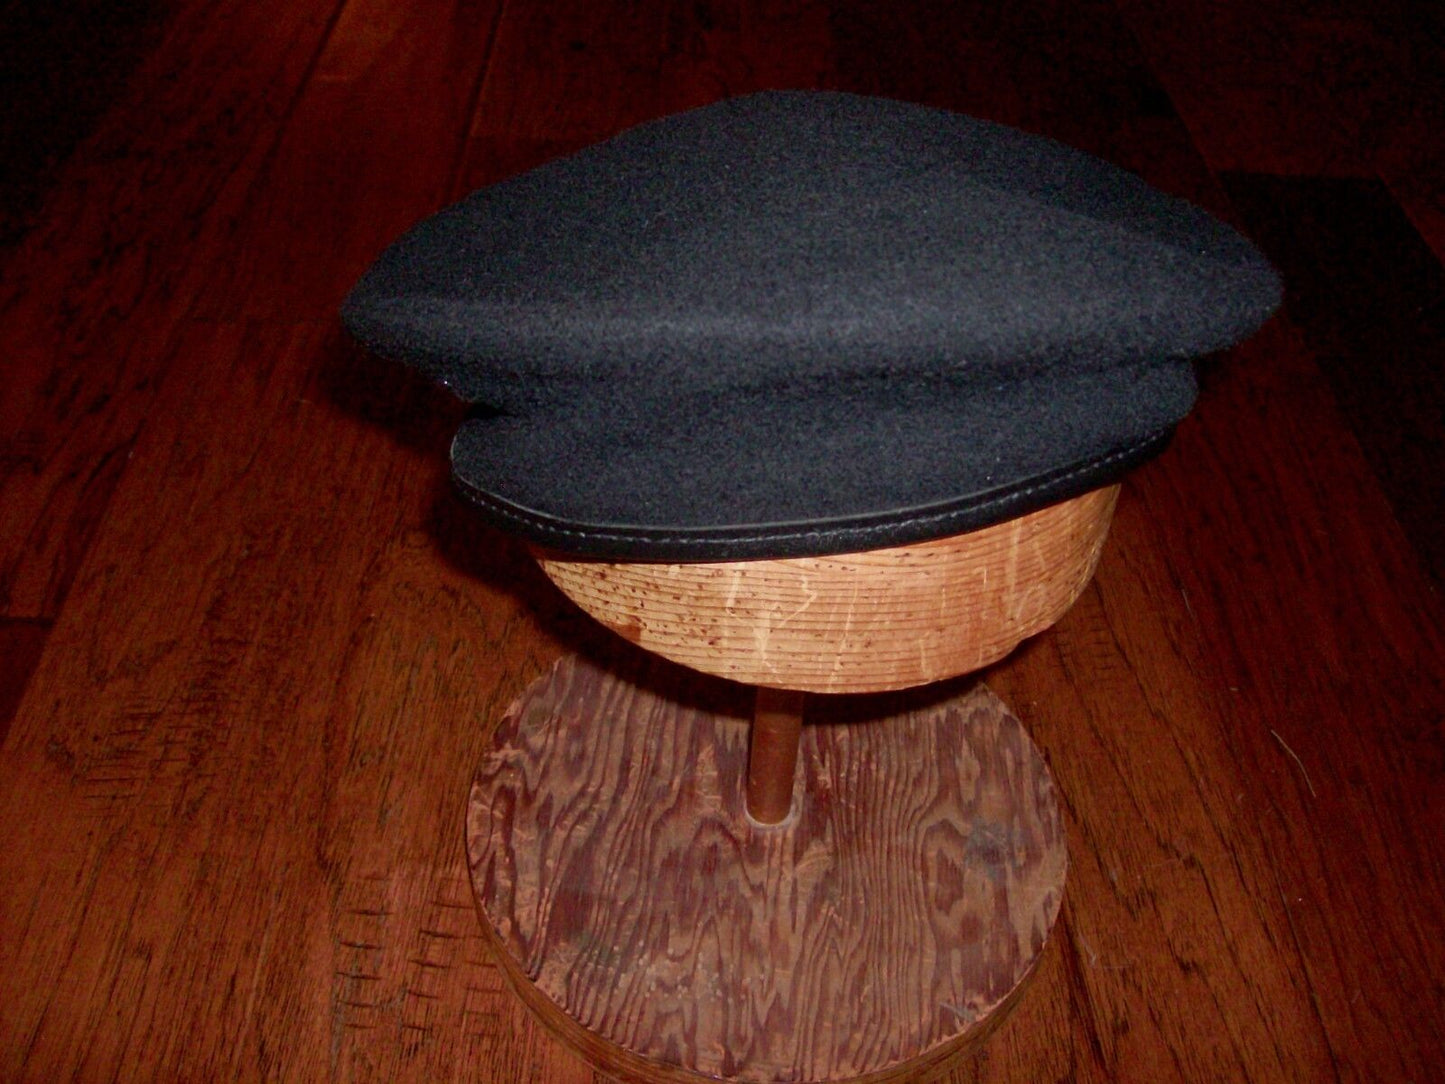 U.S MILITARY ISSUE BLACK WOOL BERET MADE IN THE U.S.A BY BANCROFT SIZE 7 3/4 XL